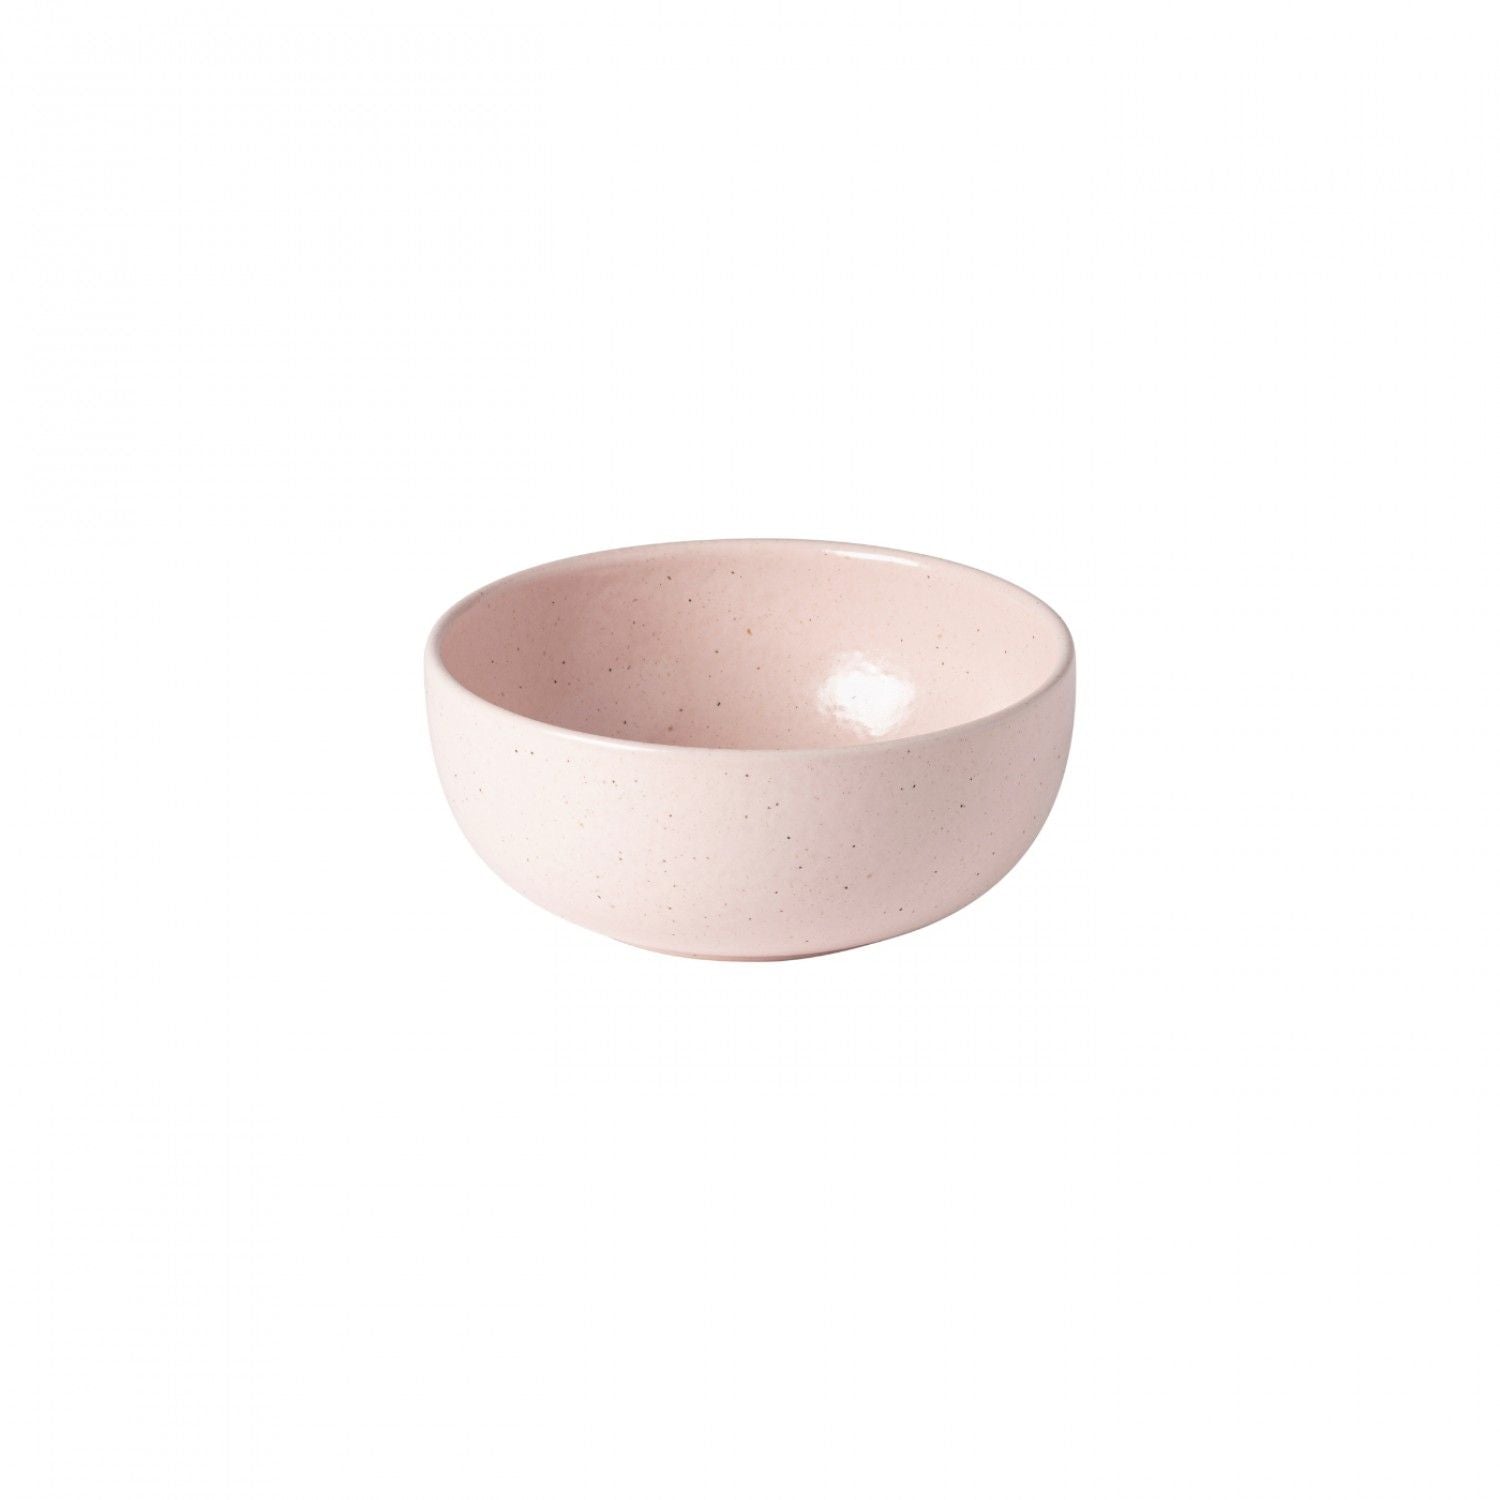 A small pink Pacifica Marshmallow Dinnerware bowl with a matte finish, part of the Casafina Living collection.